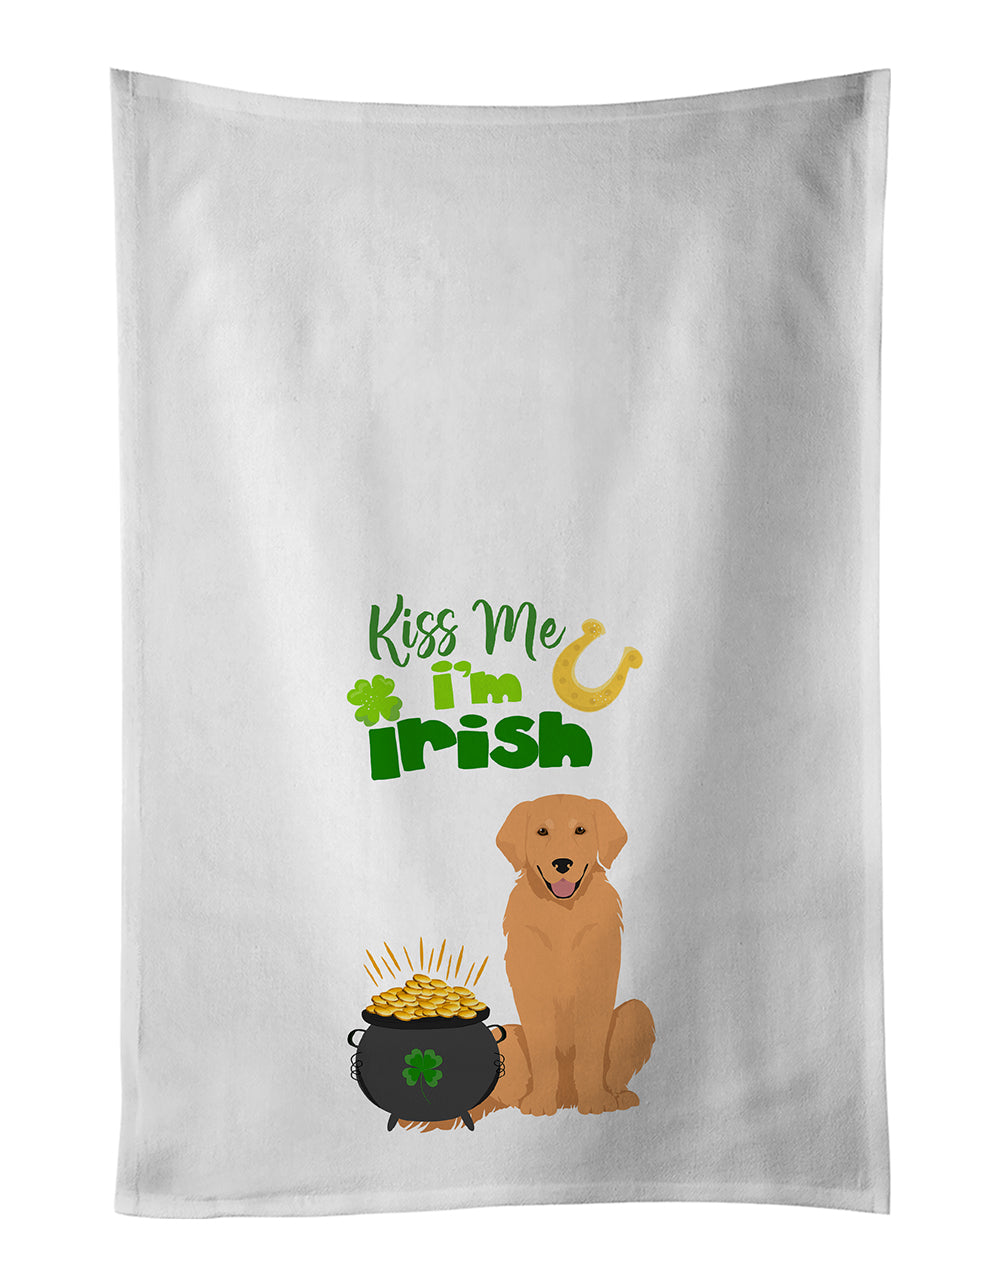 Buy this Gold Golden Retriever St. Patrick's Day White Kitchen Towel Set of 2 Dish Towels